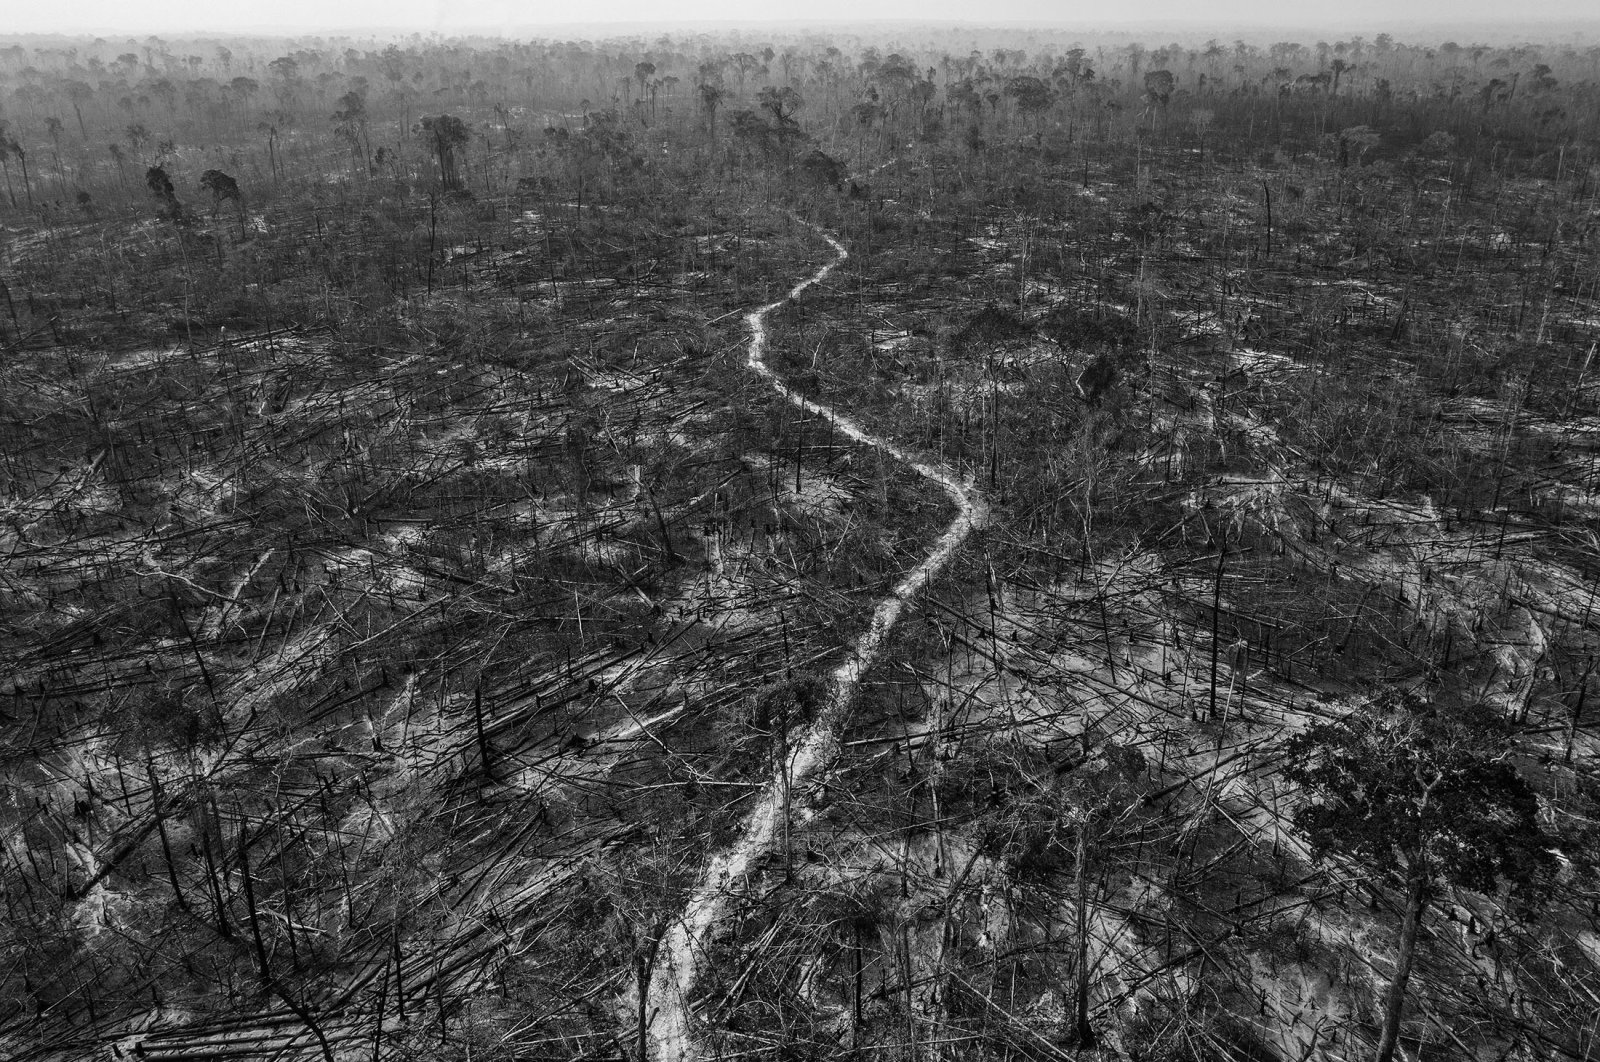 Massive deforestation can be seen in Apui, a municipality along the Trans-Amazonian Highway, southern Amazon, Brazil, Aug. 24, 2020. (AP Photo)